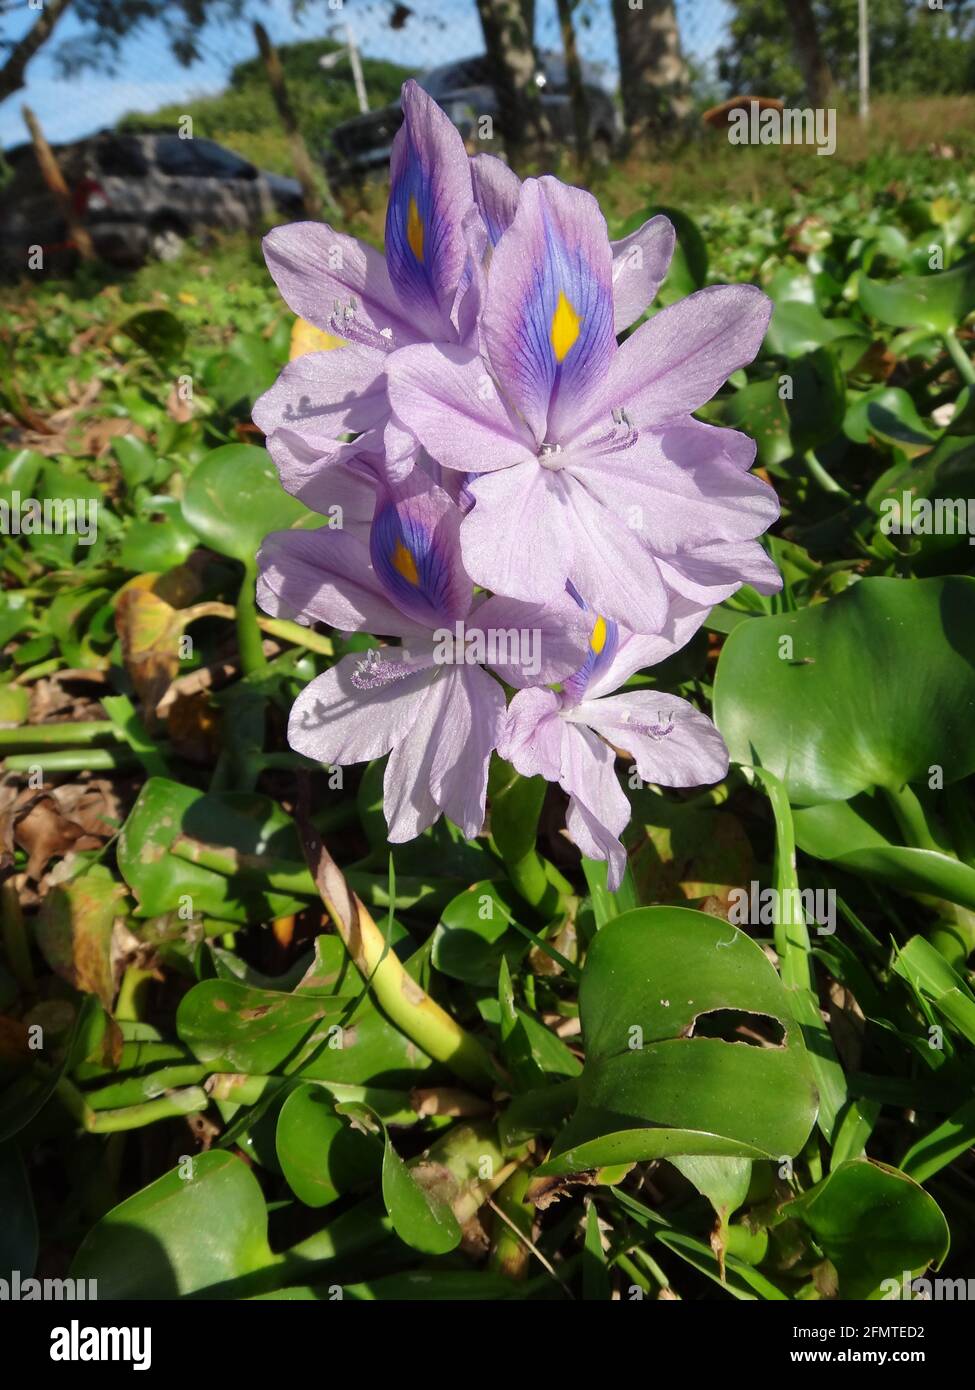 Closeup shot of a purple flower called Common water hyacinth grown in the garden Stock Photo